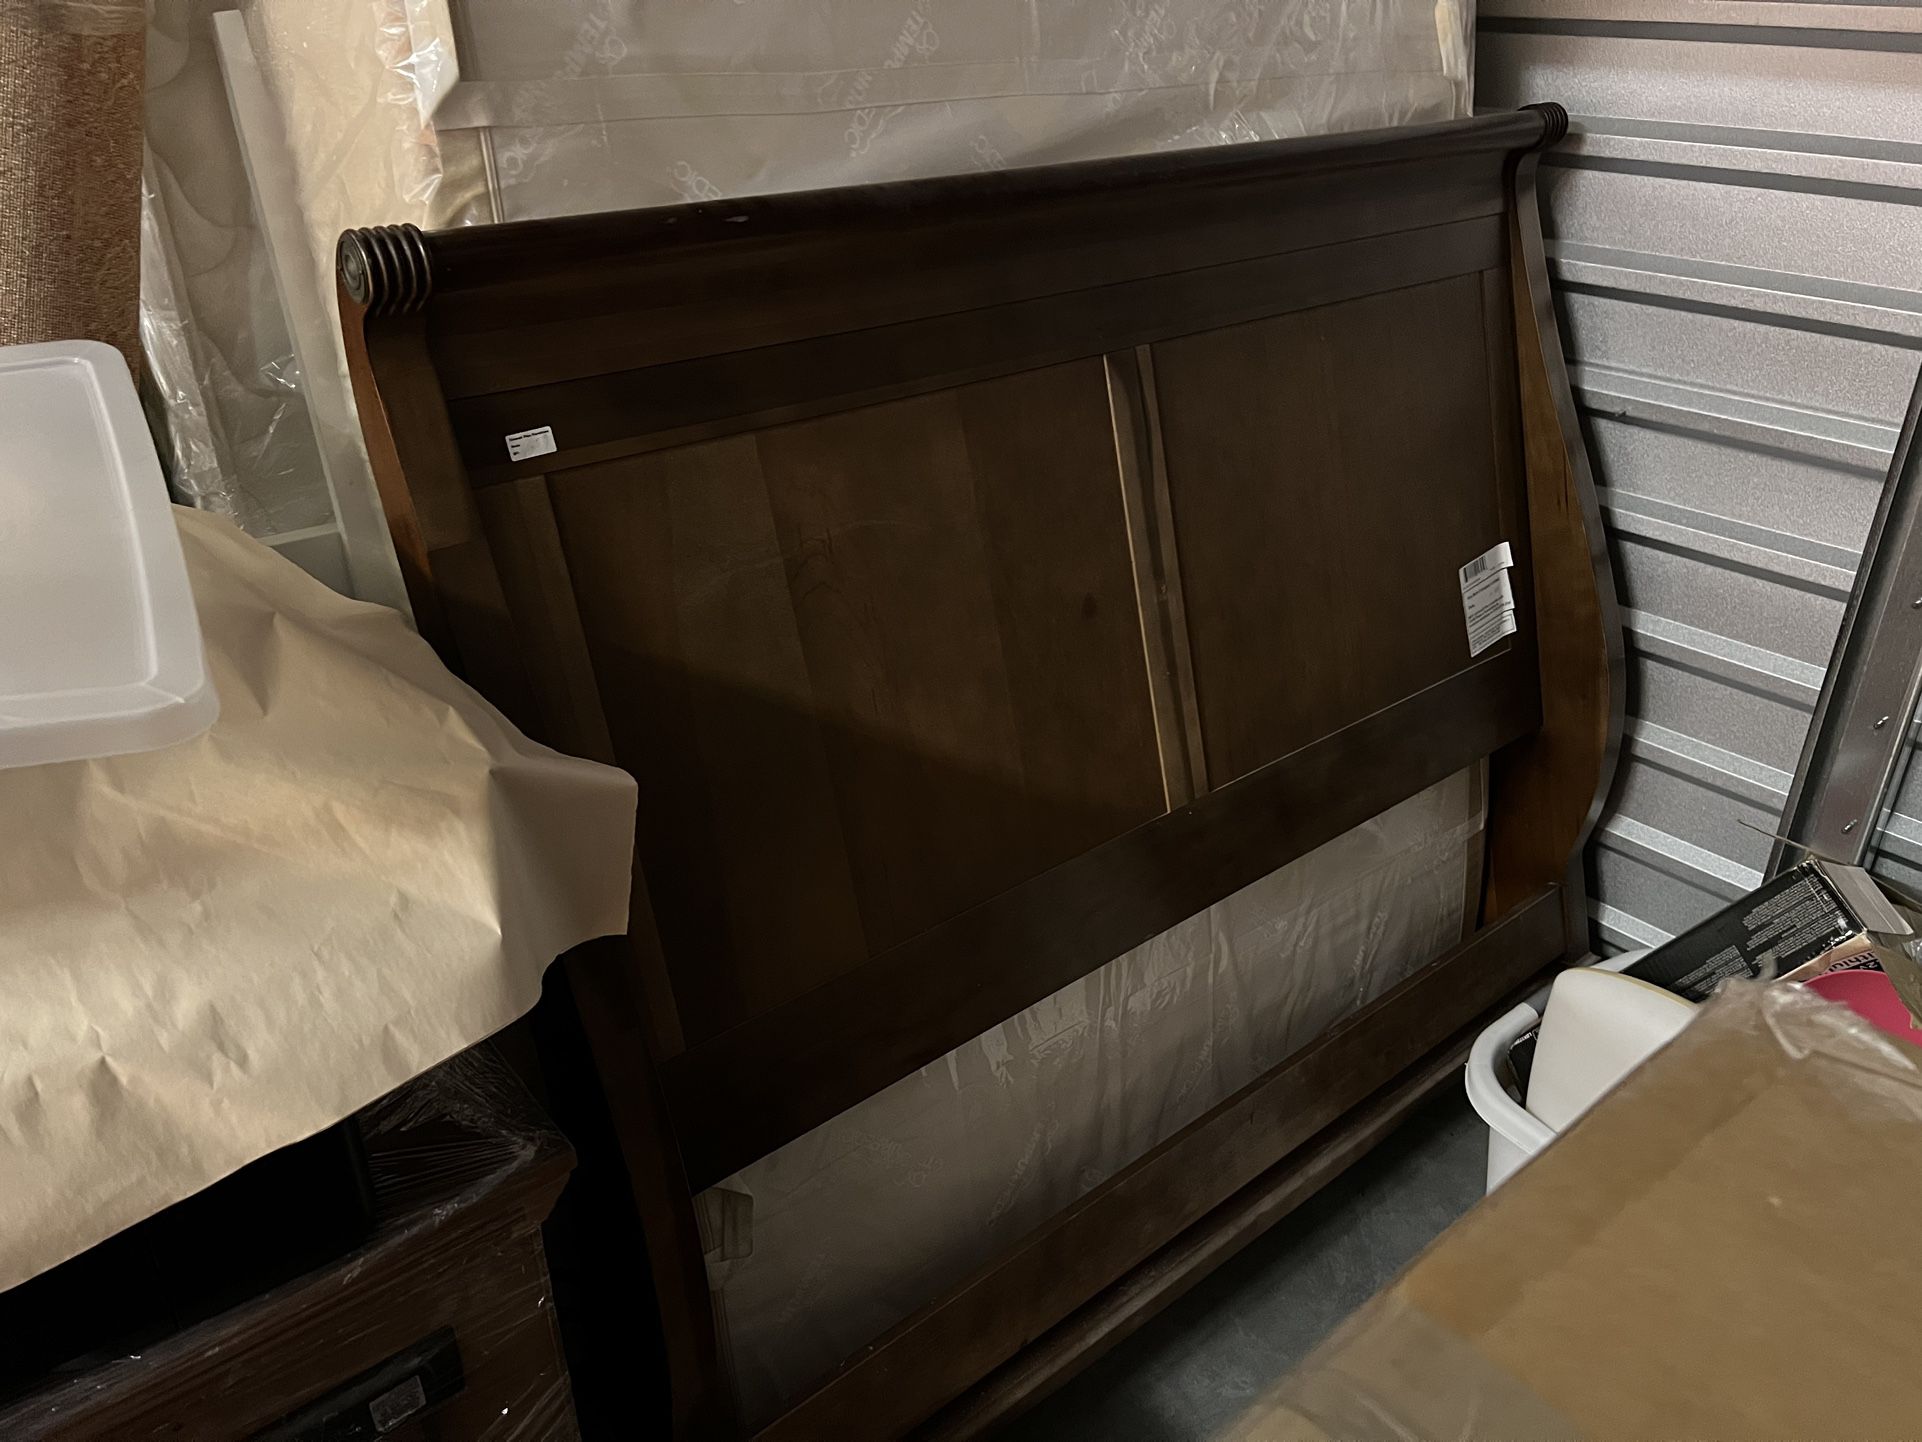 Full Size Bed Frame With Mattress